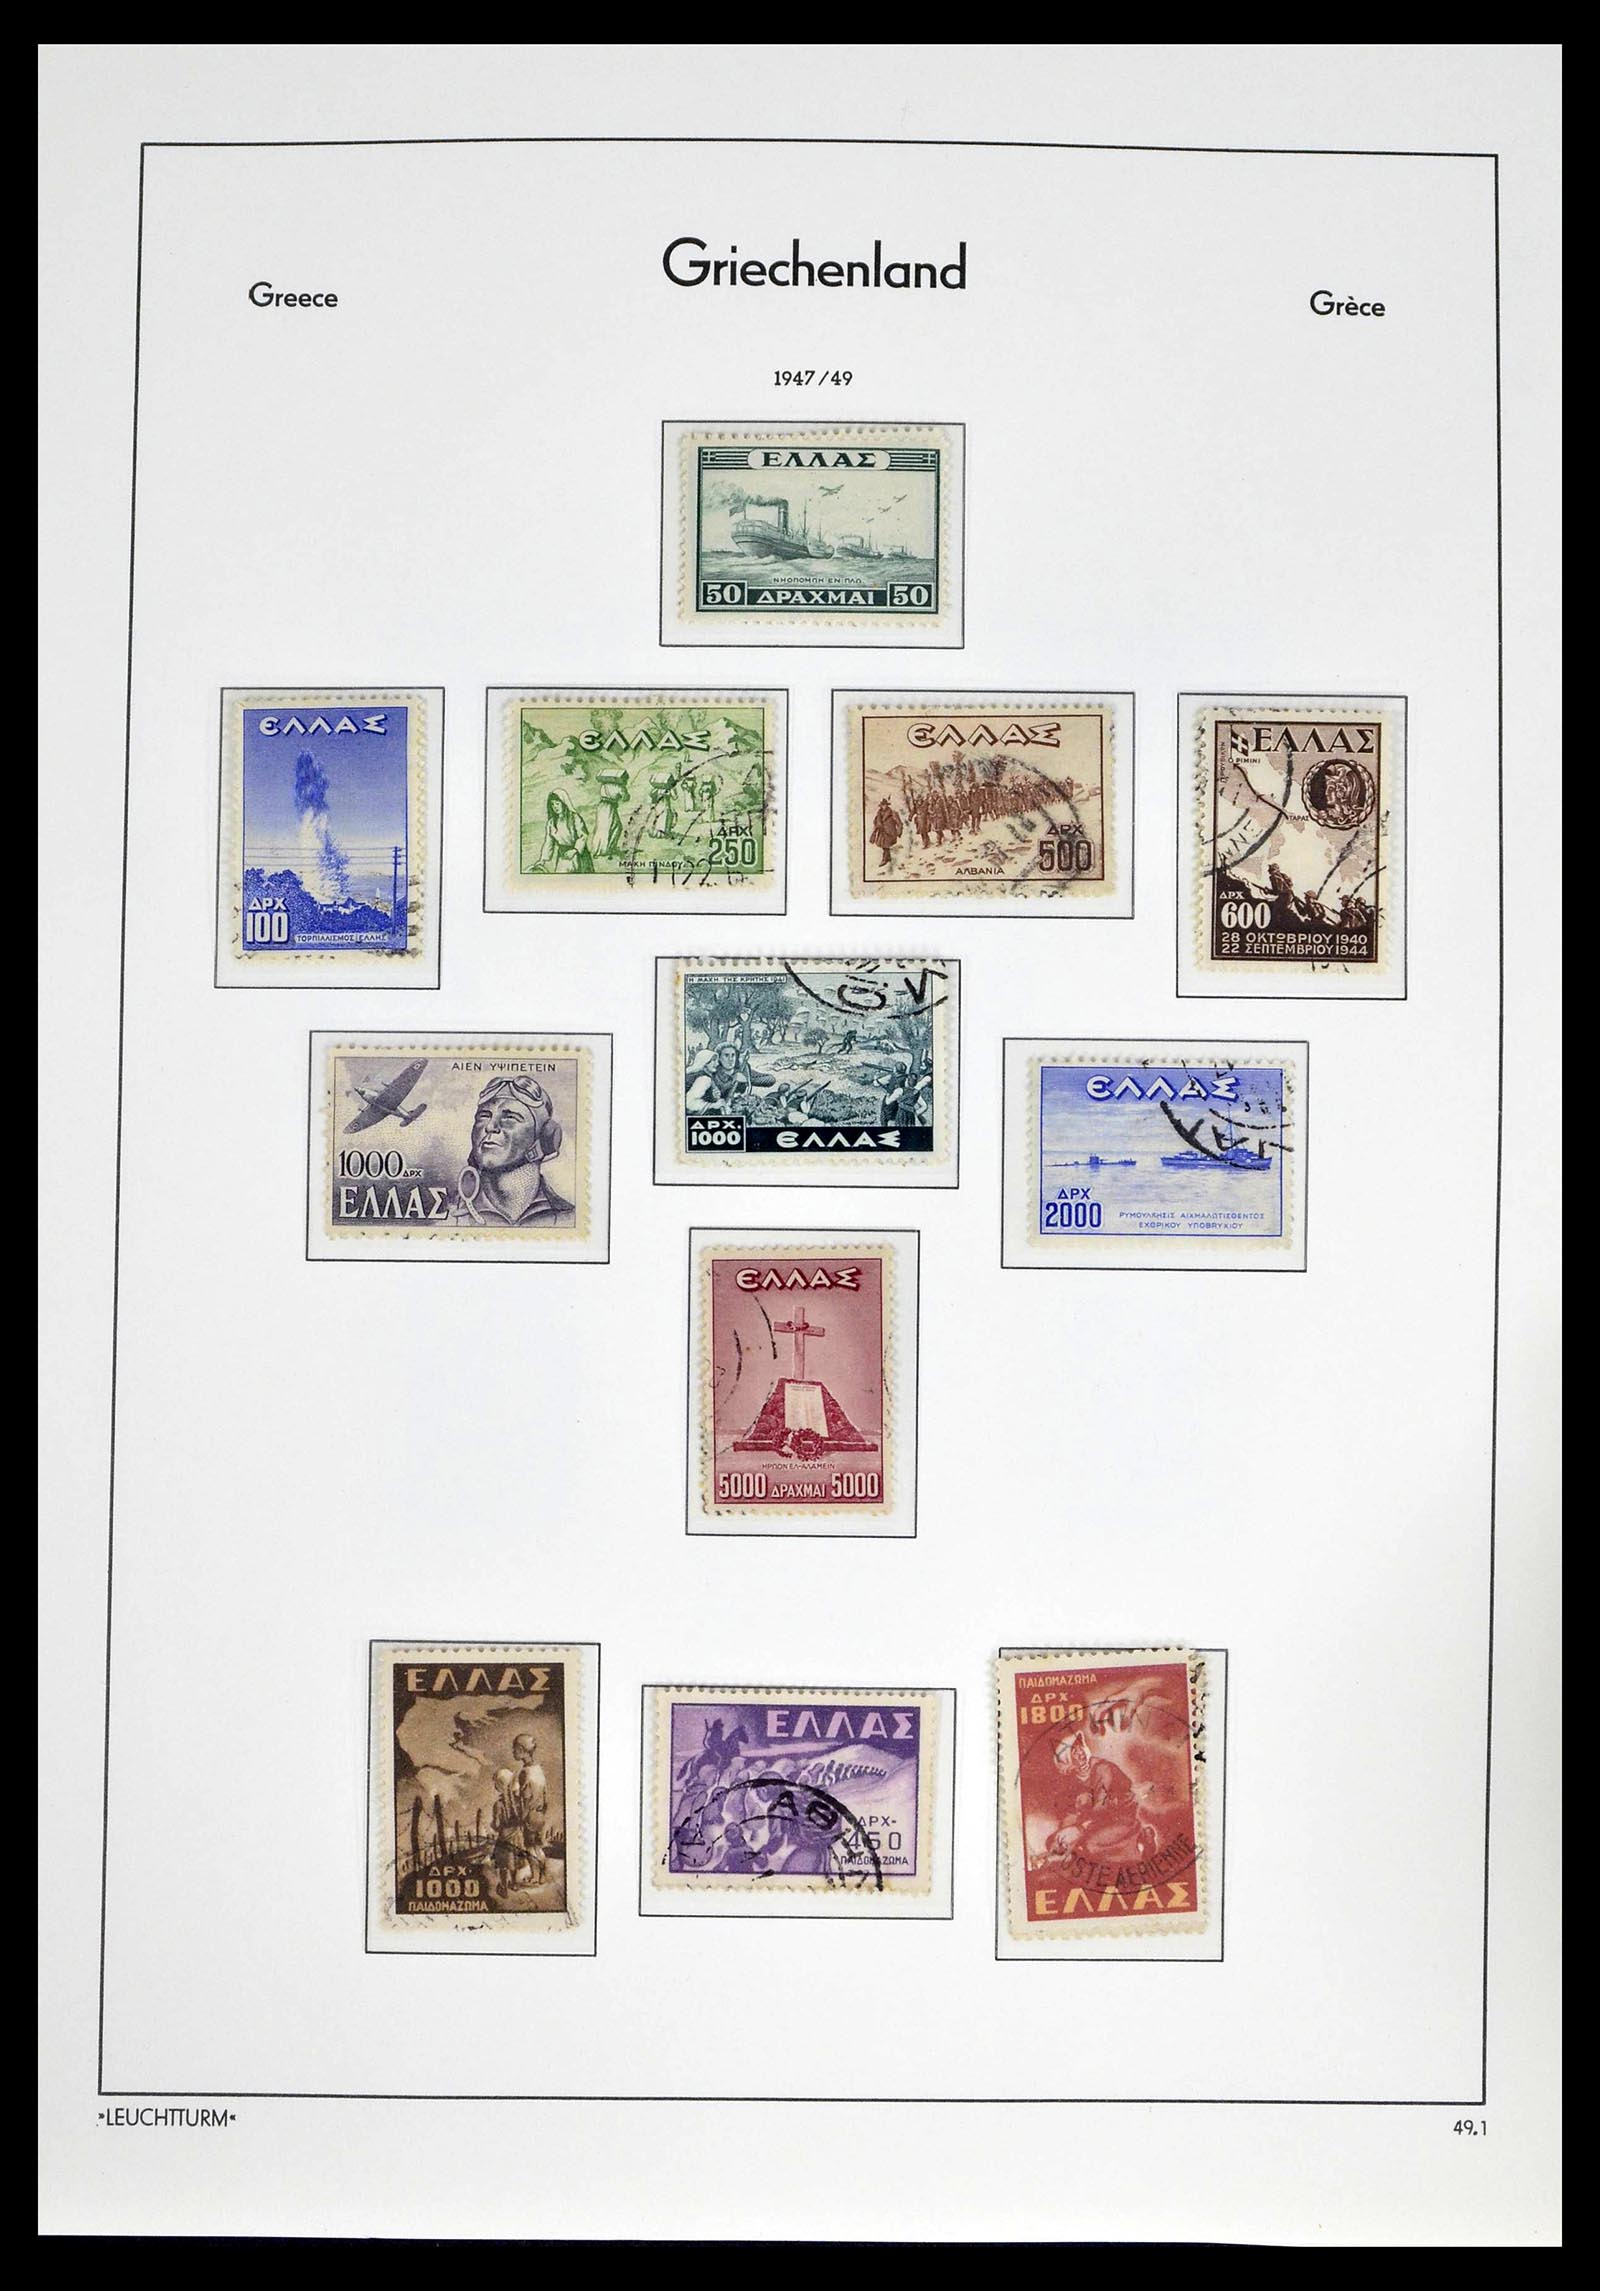 39243 0057 - Stamp collection 39243 Greece 1861-1965.